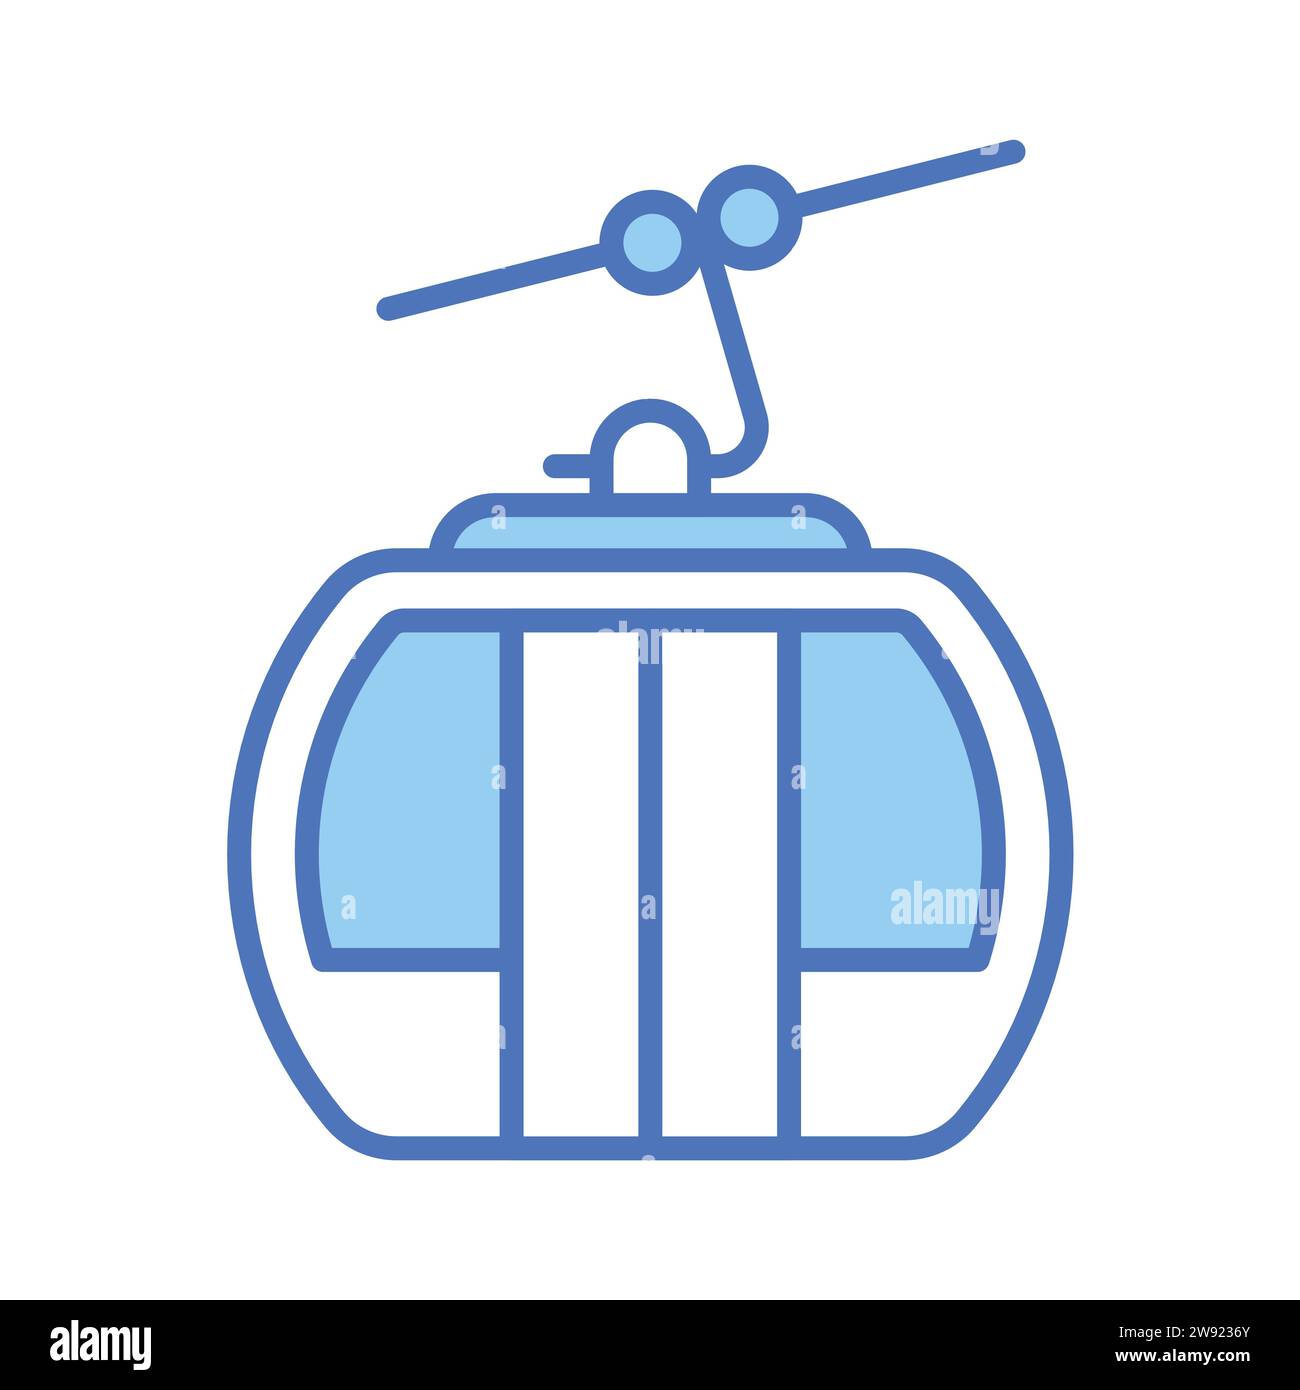 Cable car vector denoting transportation that uses cables to pull tram-like vehicles up and down steep hills or inclines Stock Vector